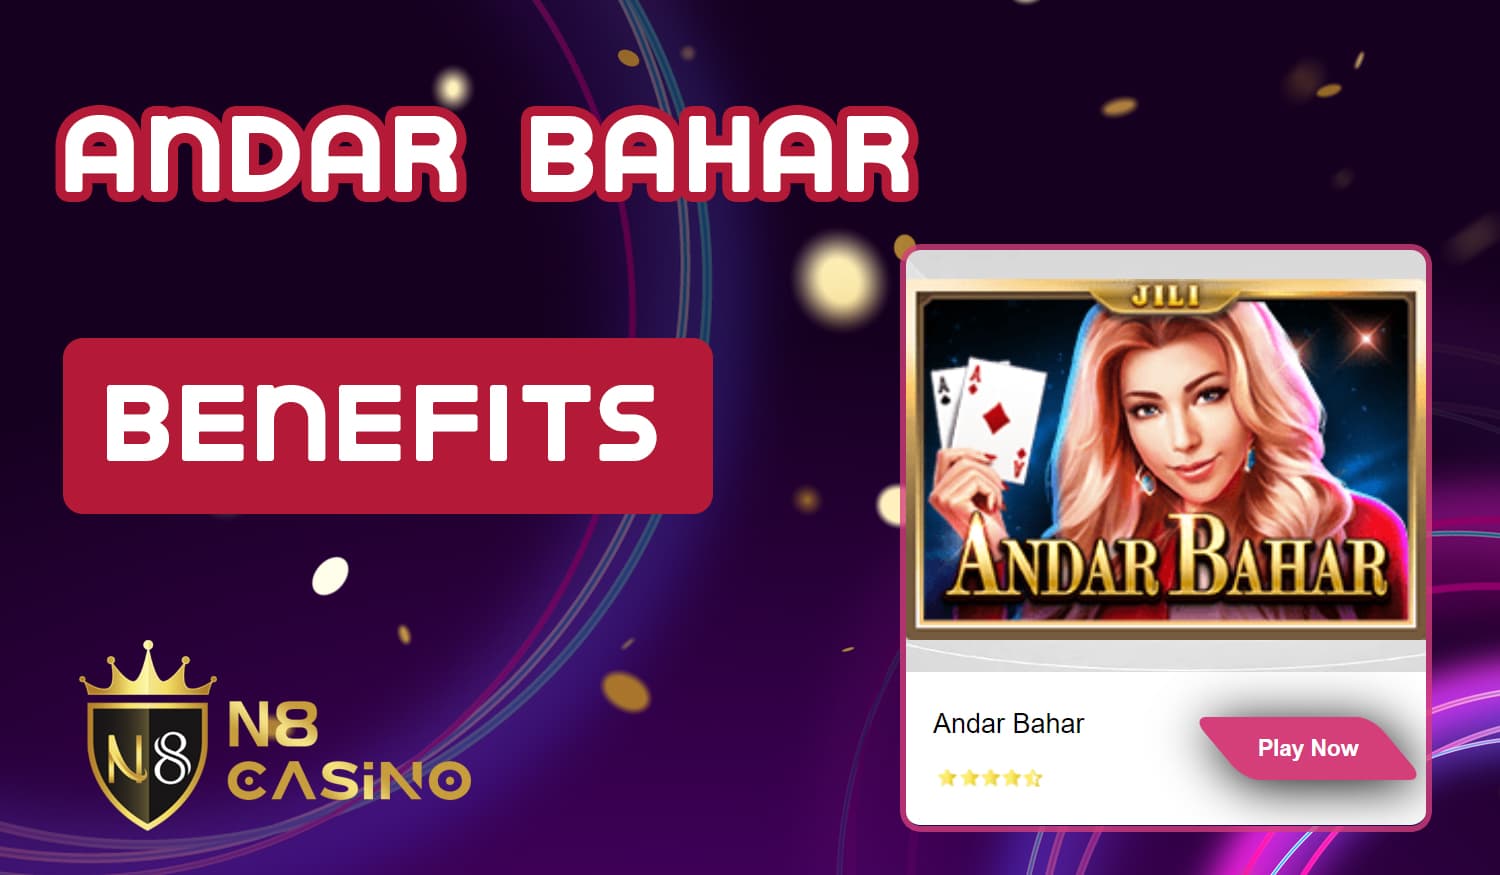 List of benefits of playing Andar Bahar on N8 Casino website